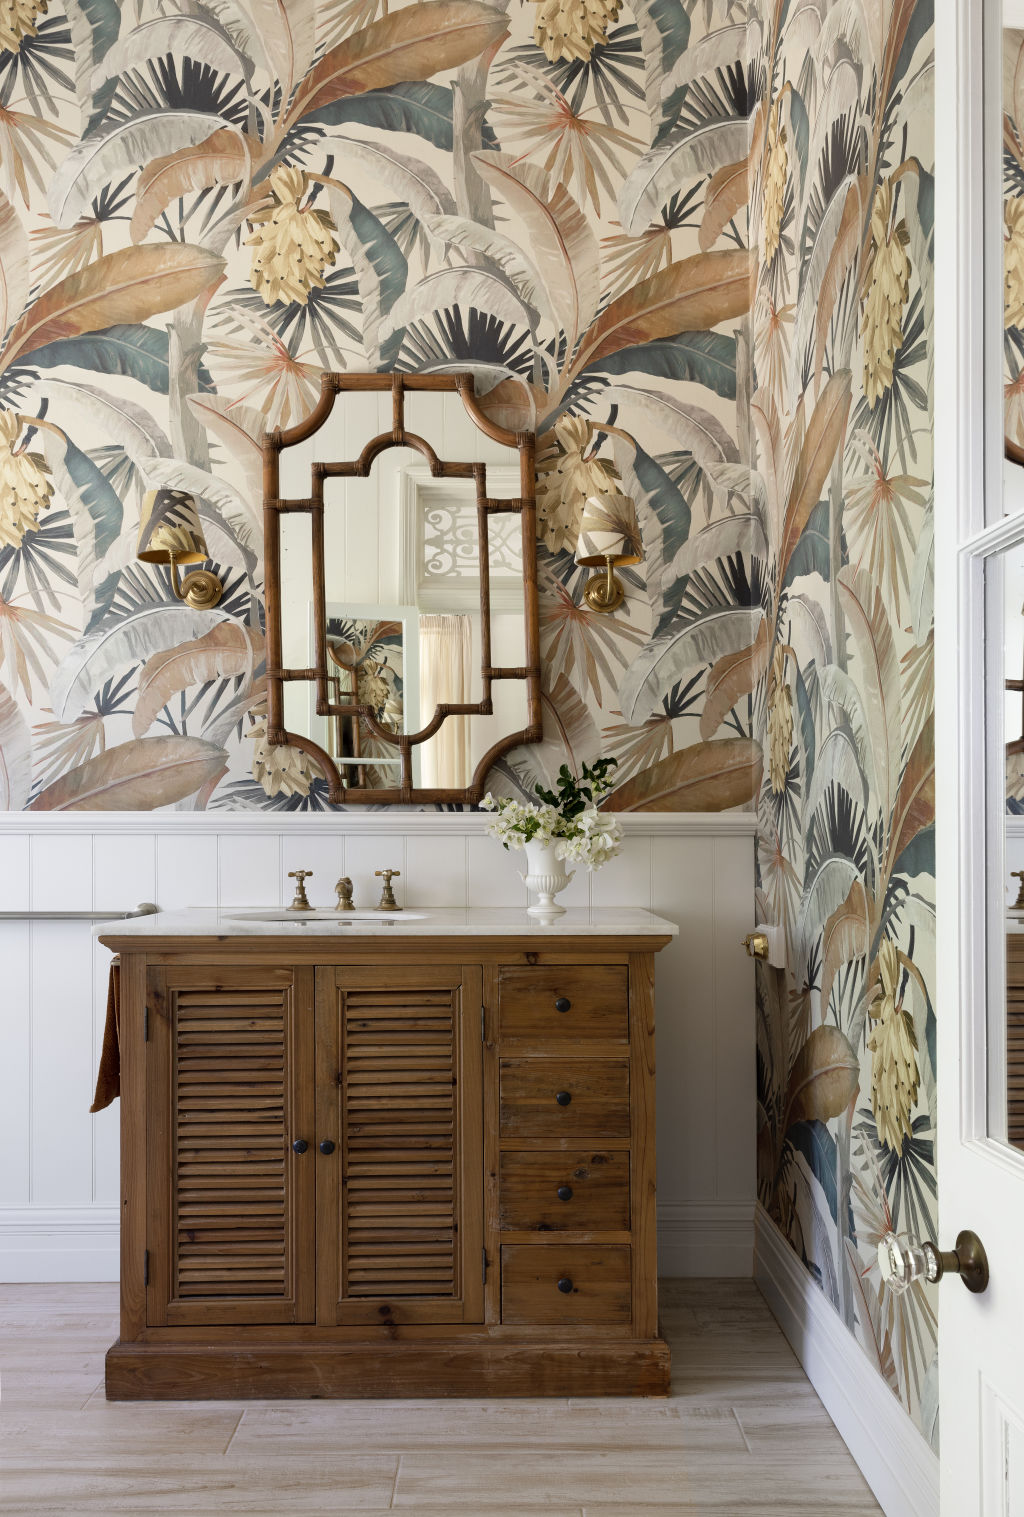 Nothing boring here: the couple chose bold Catherine Martin wallpapers for the bathroom. Photo: The Design Villa